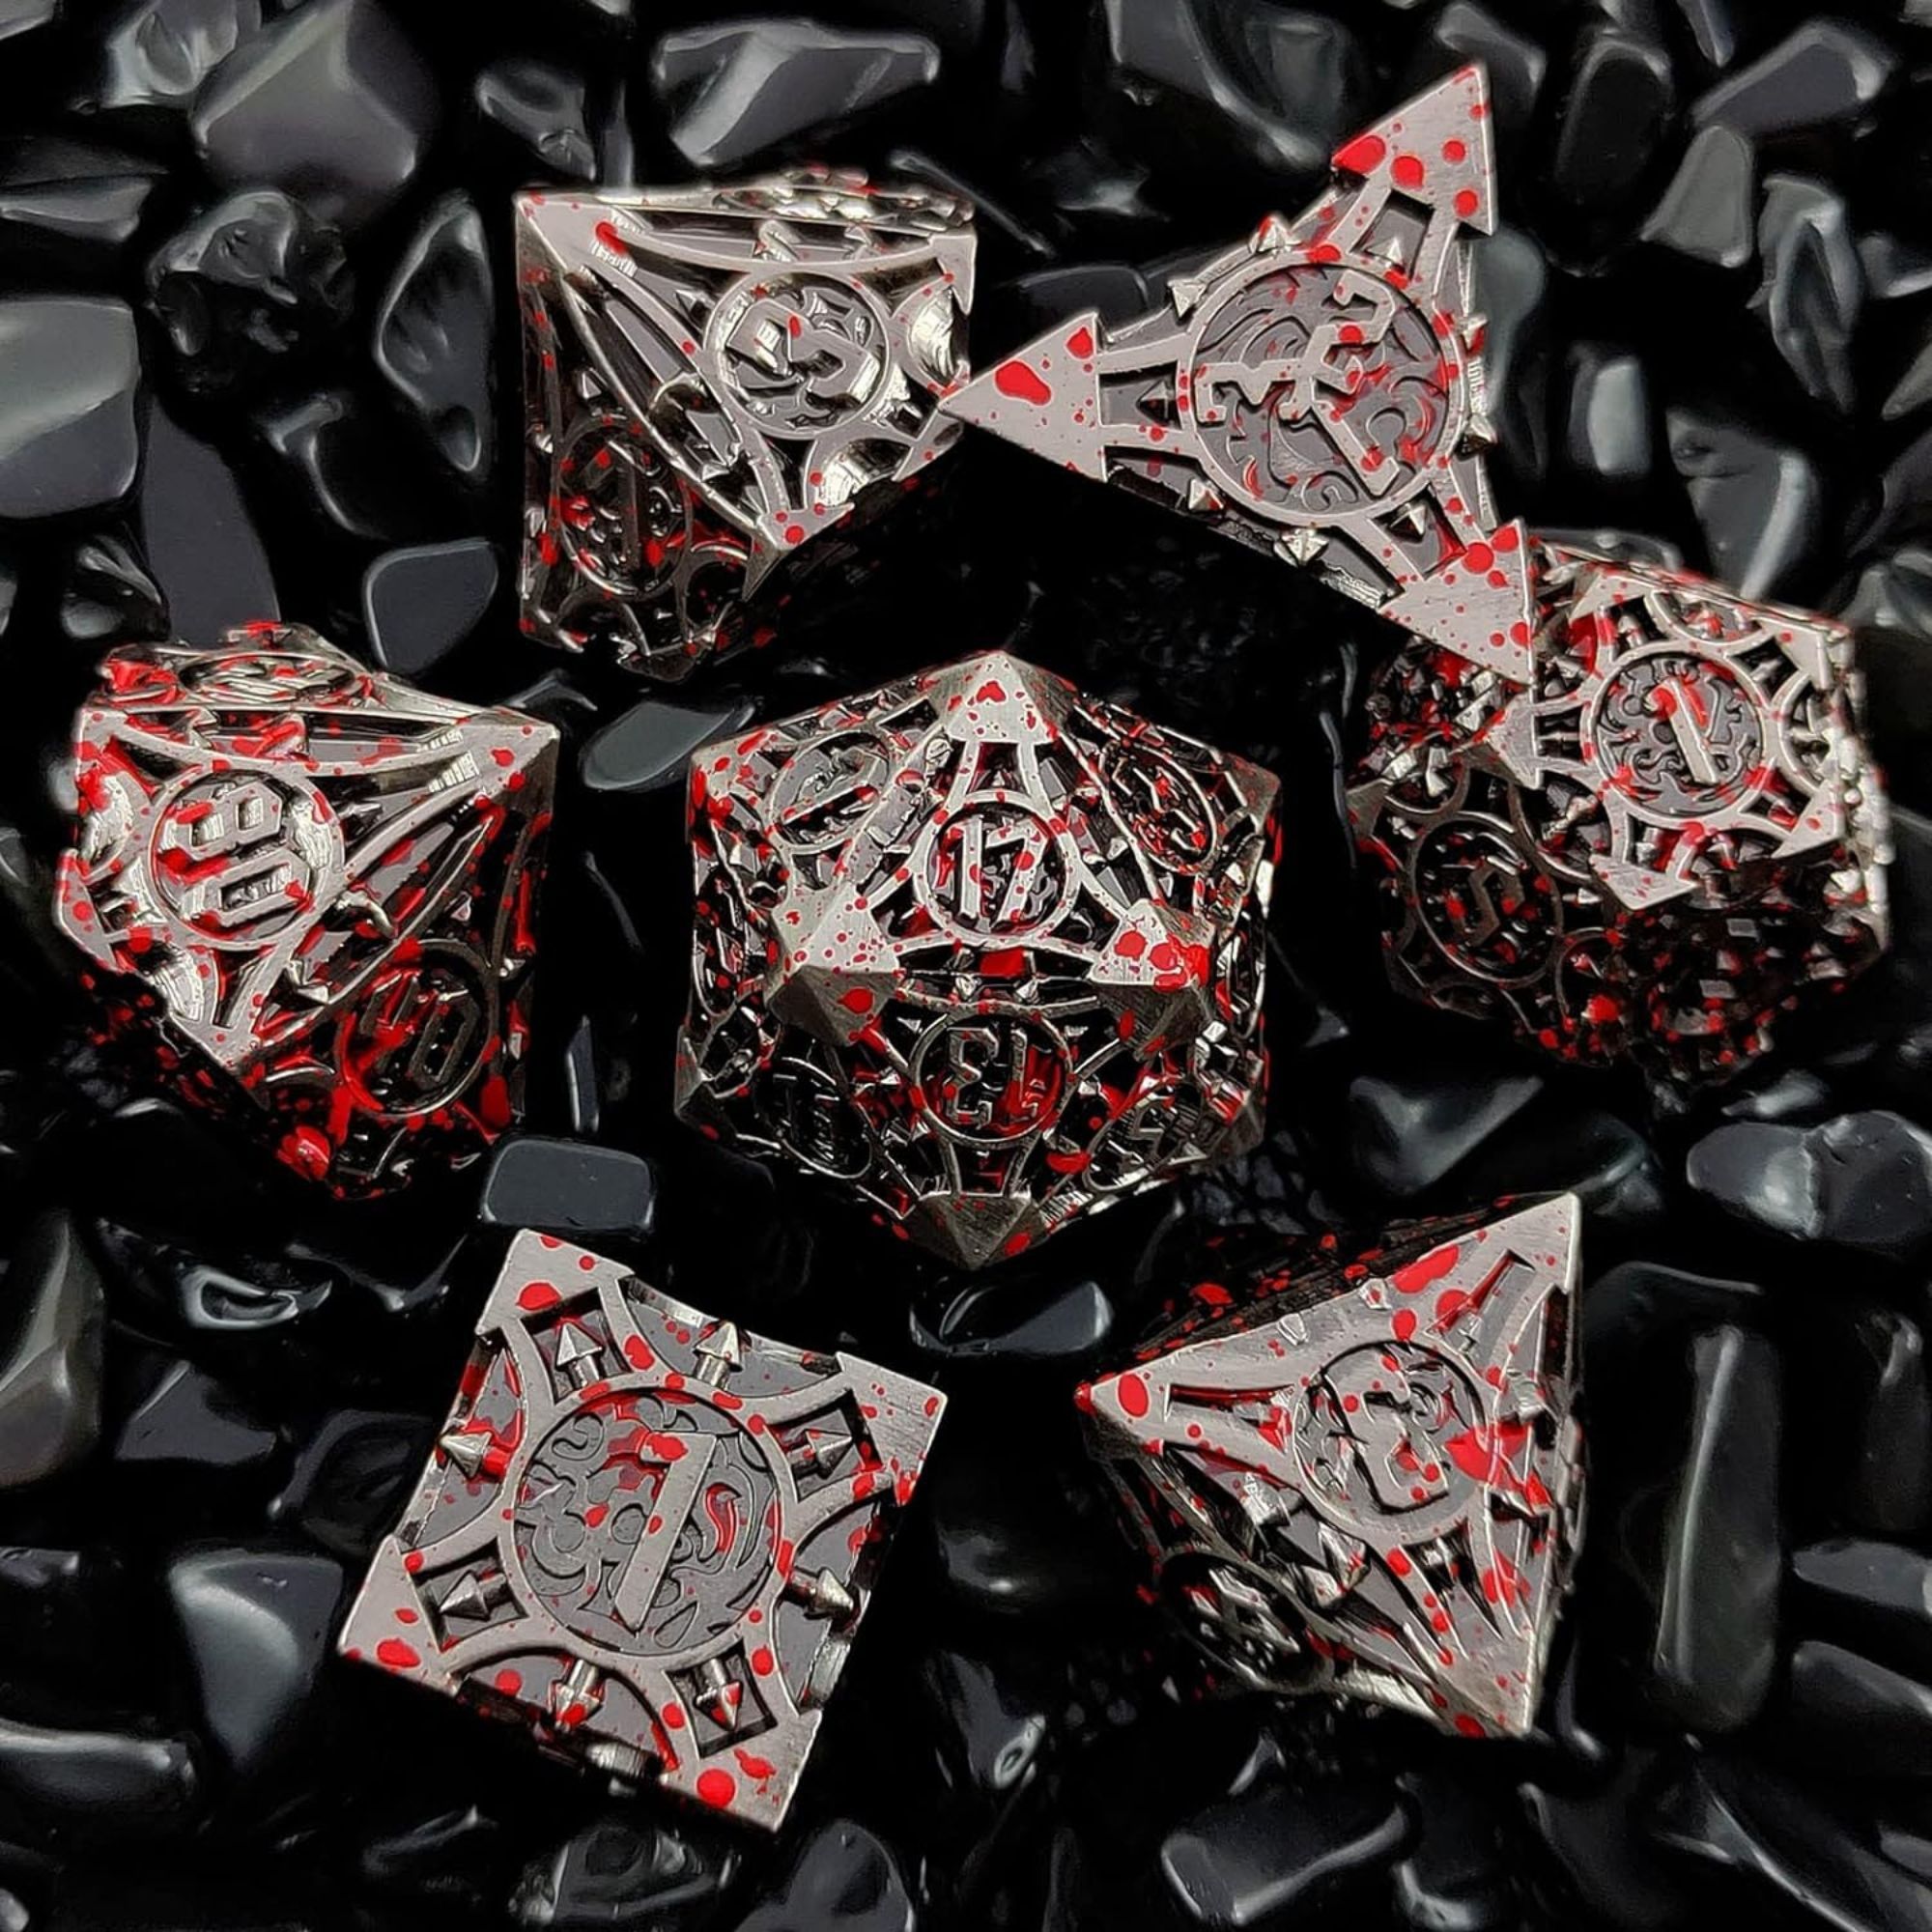 Product still for the D&D 7 Pcs Blood Dice Set on a white background